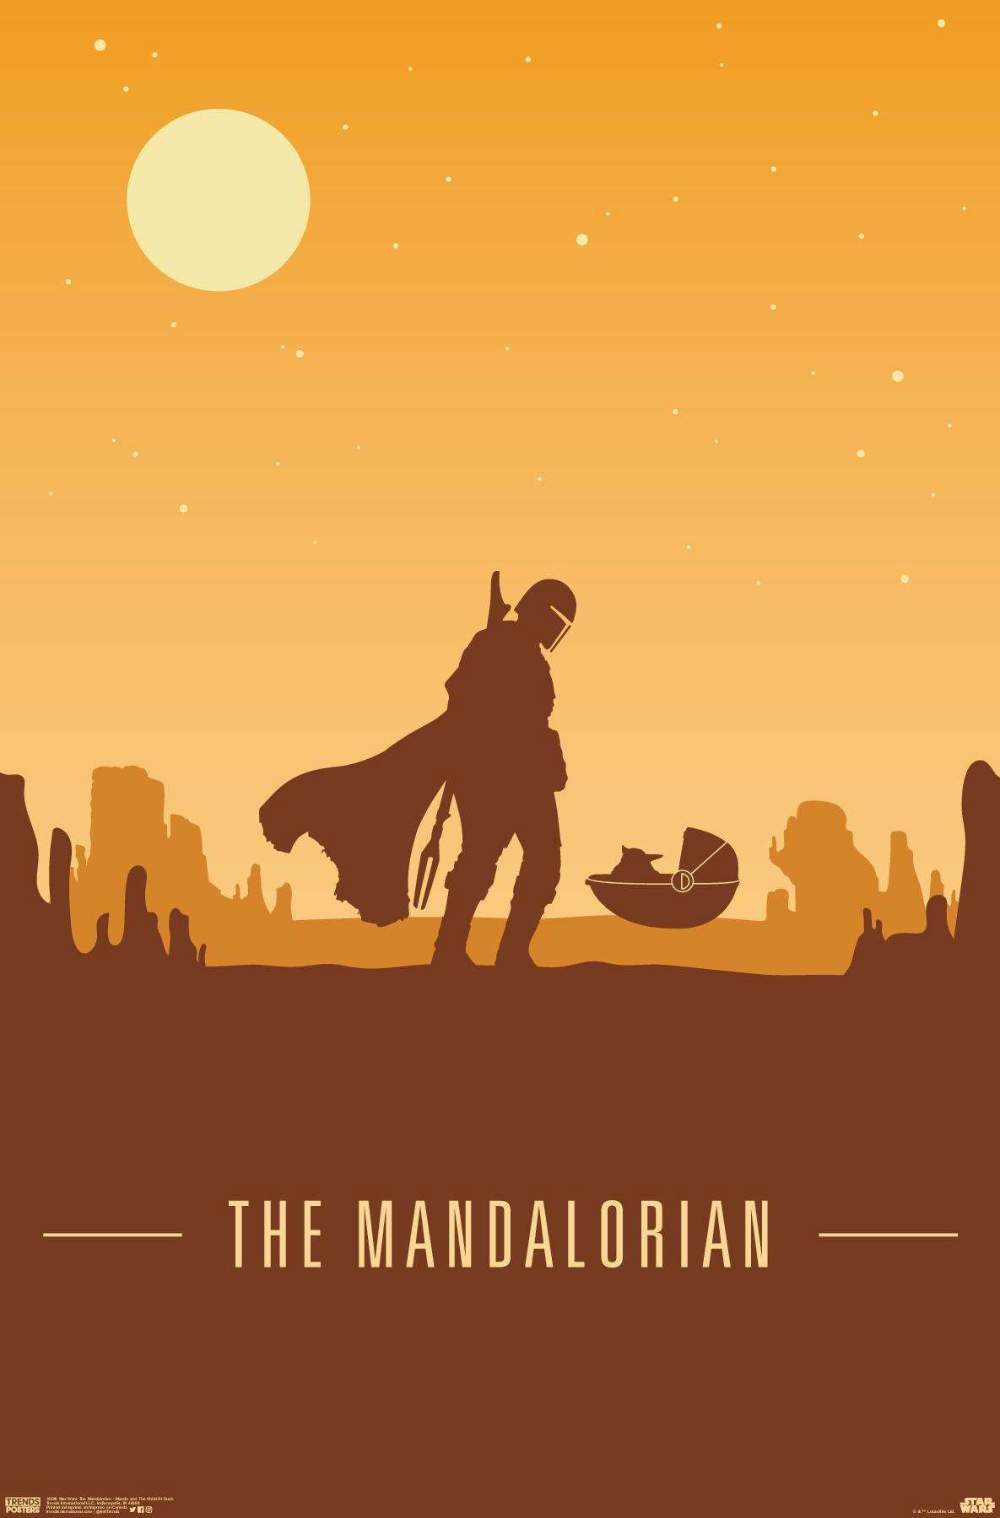 Star Wars: The Mandalorian and The Child At Dusk. Star wars wallpaper, Star wars poster, Star wars art